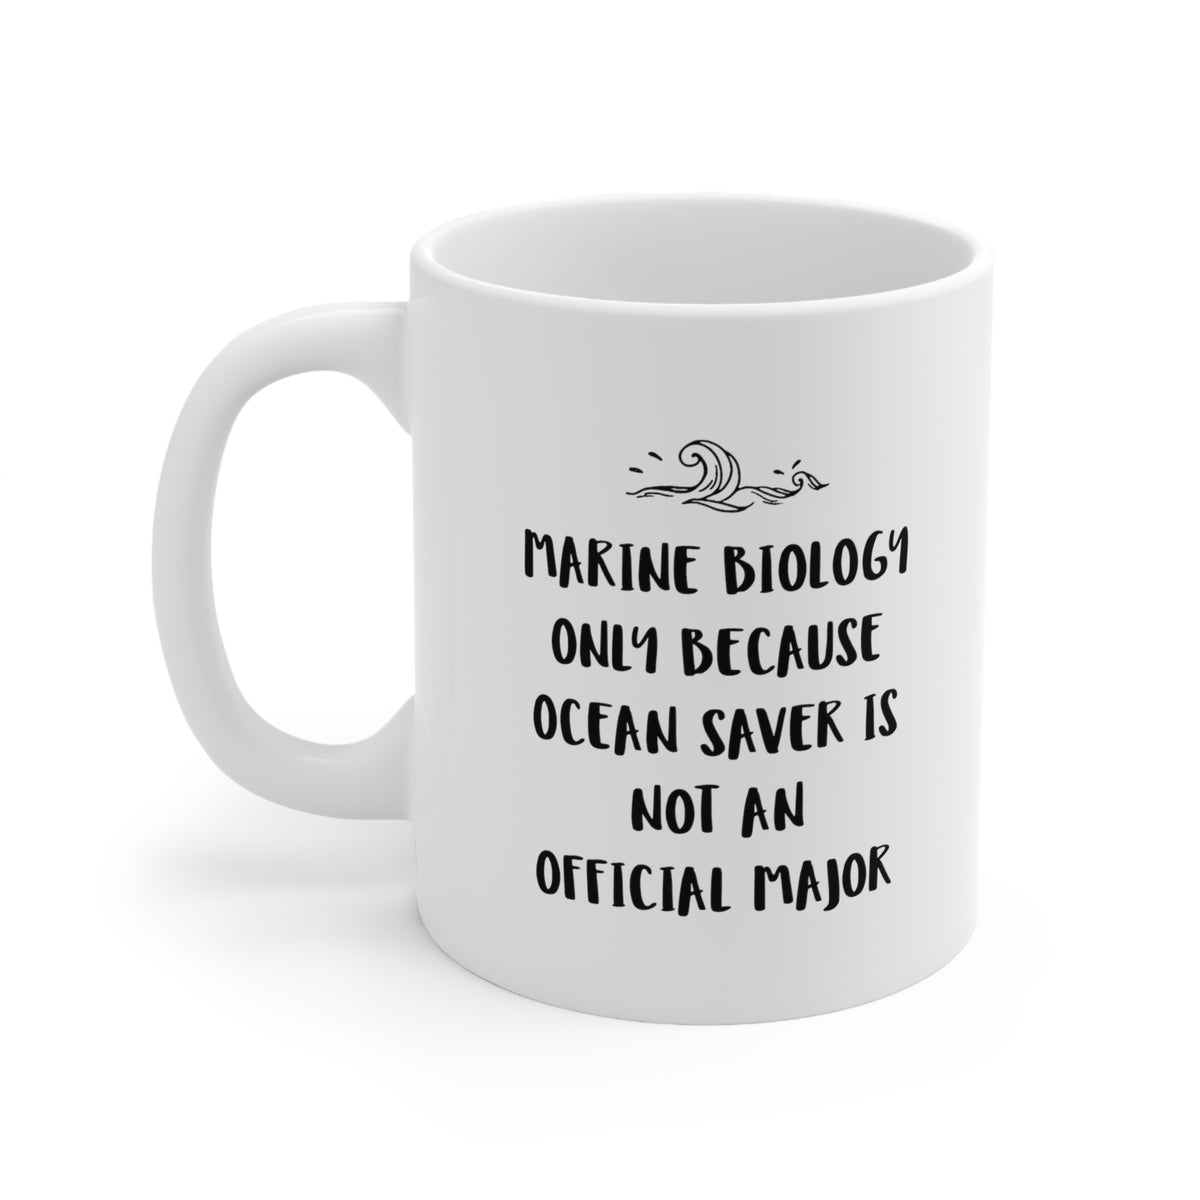 Marine Biologist Coffee Mug - Marine Biology Only Because Ocean Saver Is Not An Official Major - Perfect Mugs For Marine Biologist